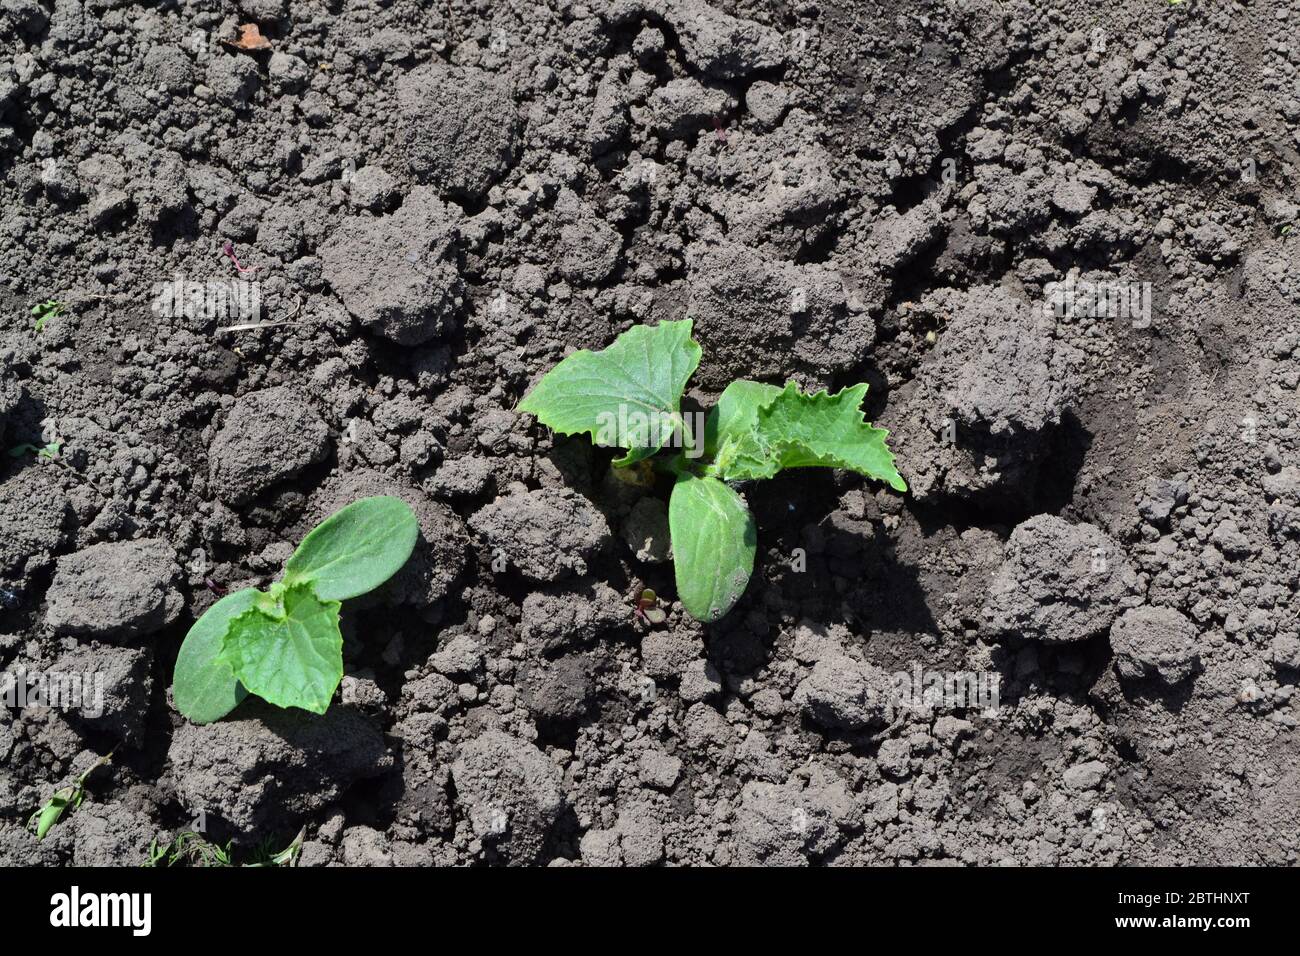 Gardening. Home garden, flower bed. House, field. Green leaves, bushes. Cucumber. Cucumis sativus, an annual herb. Young shoots Stock Photo